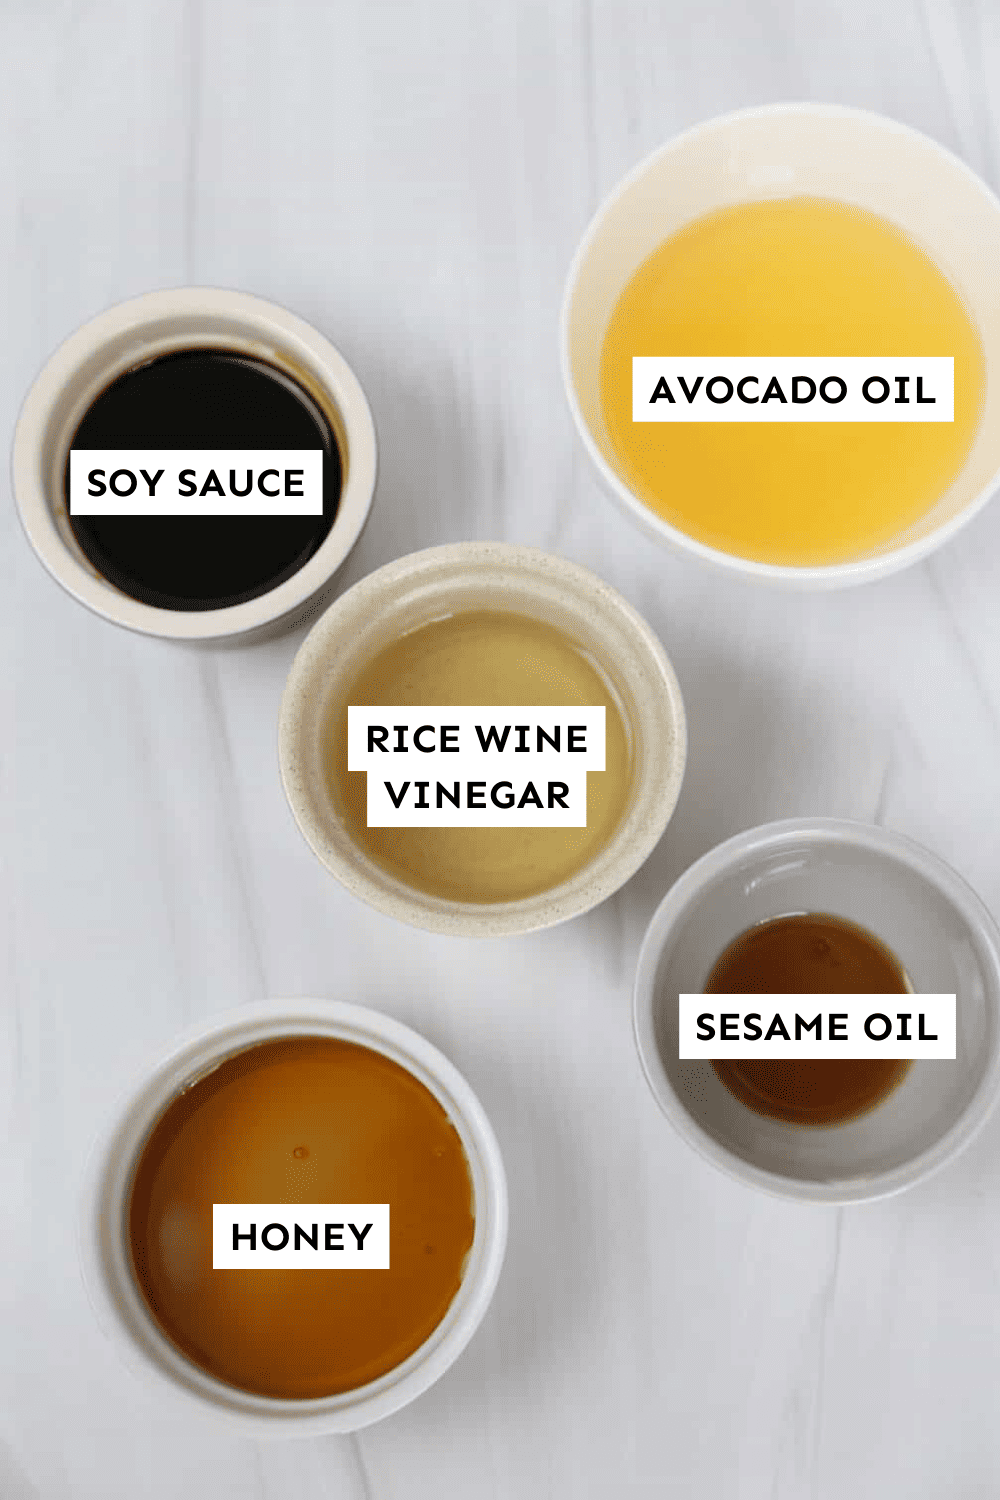 Asian sesame salad dressing ingredients measured out in bowls and labeled.